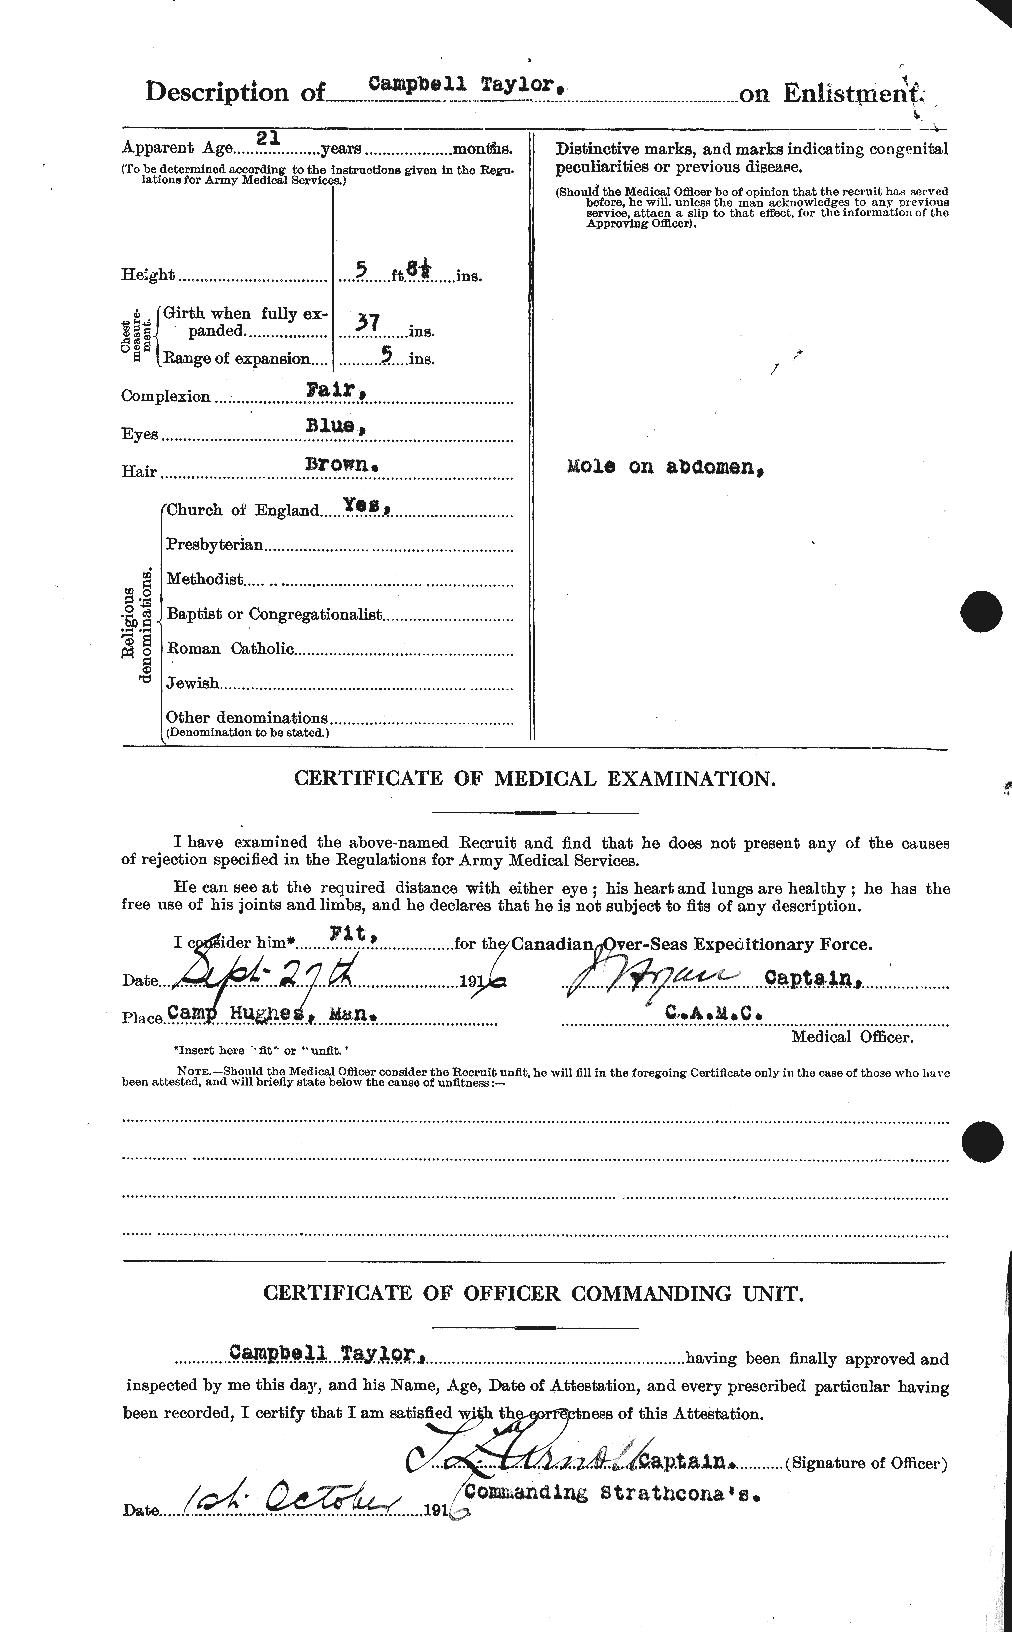 Personnel Records of the First World War - CEF 626782b